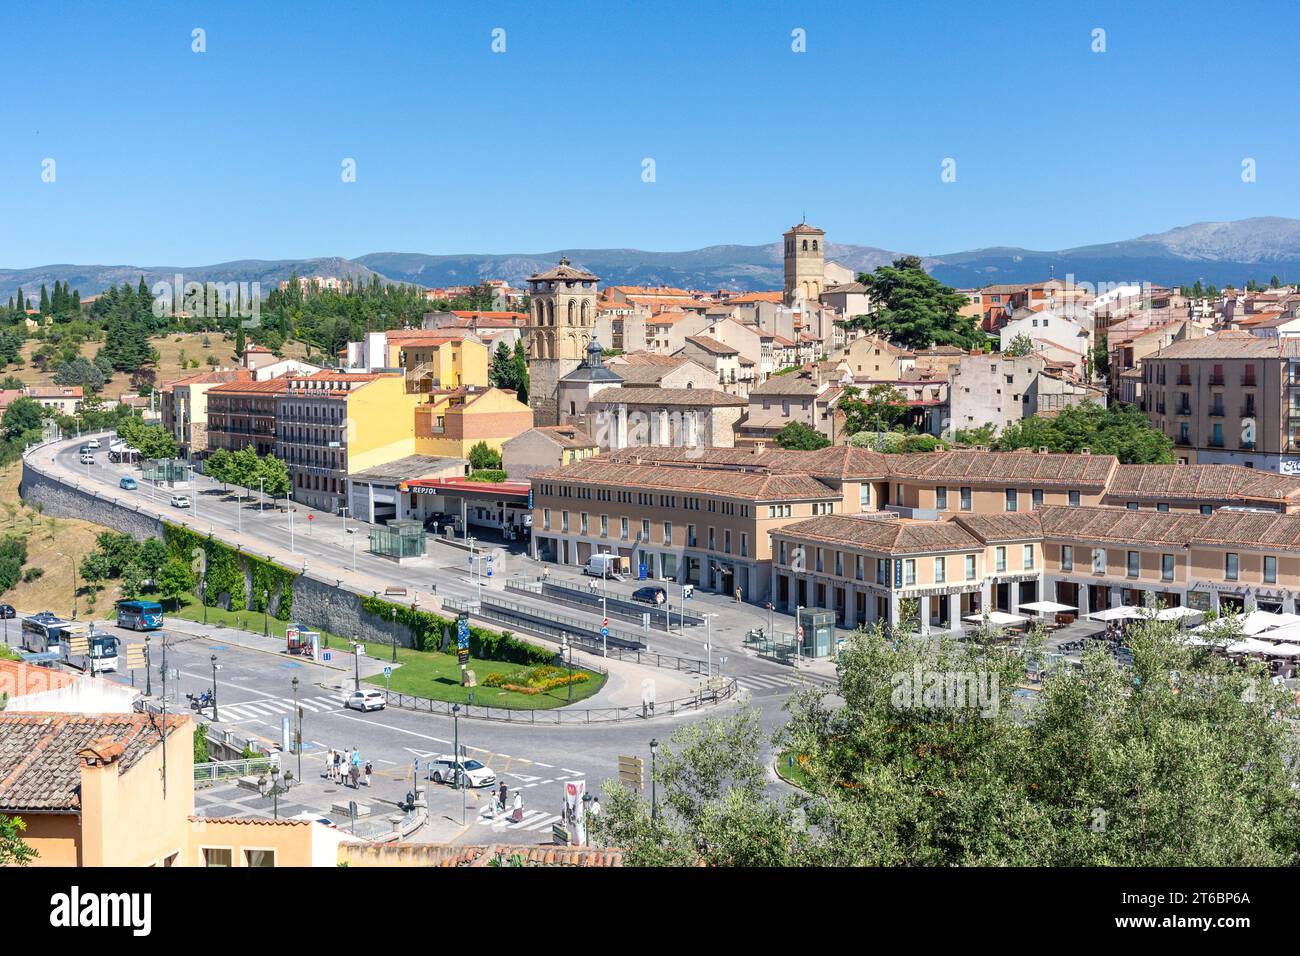 View of Avenue Padre Claret and Old Town from Postigo Del Consuelo, Segovia, Castile and León, Kingdom of Spain Stock Photo